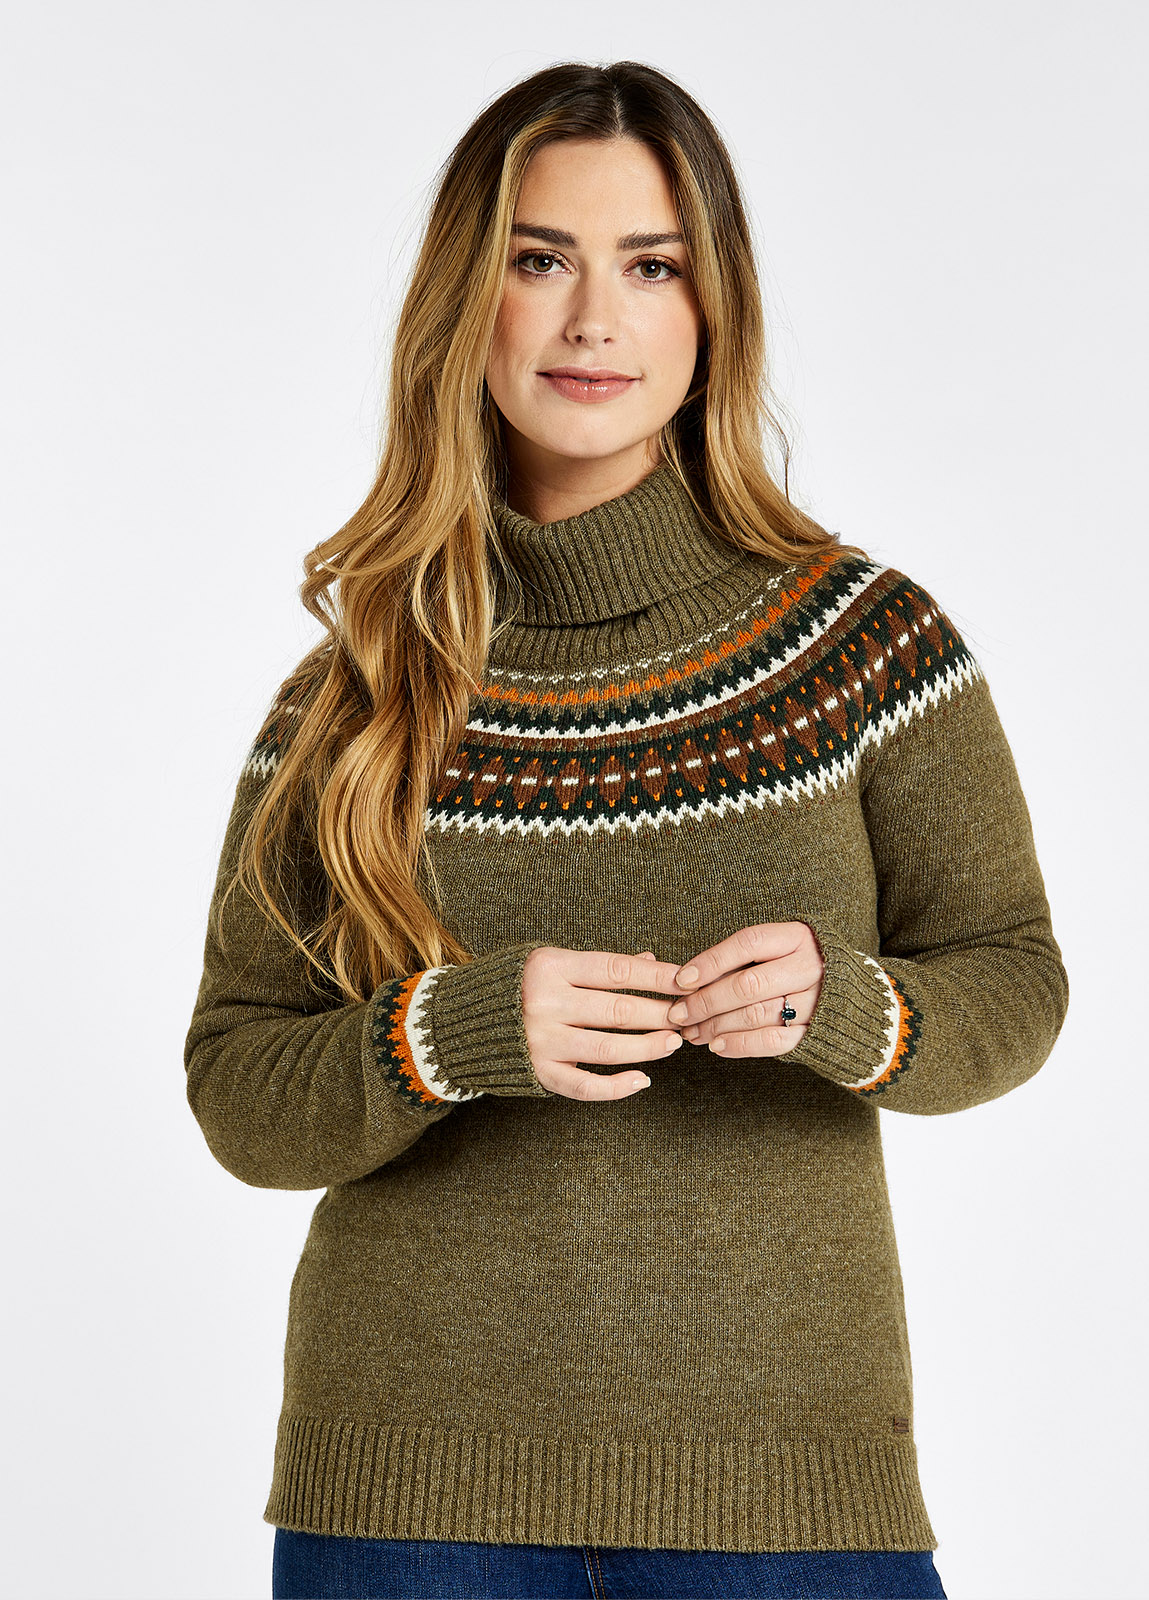 Dubarry's Knitwear Collection for Women